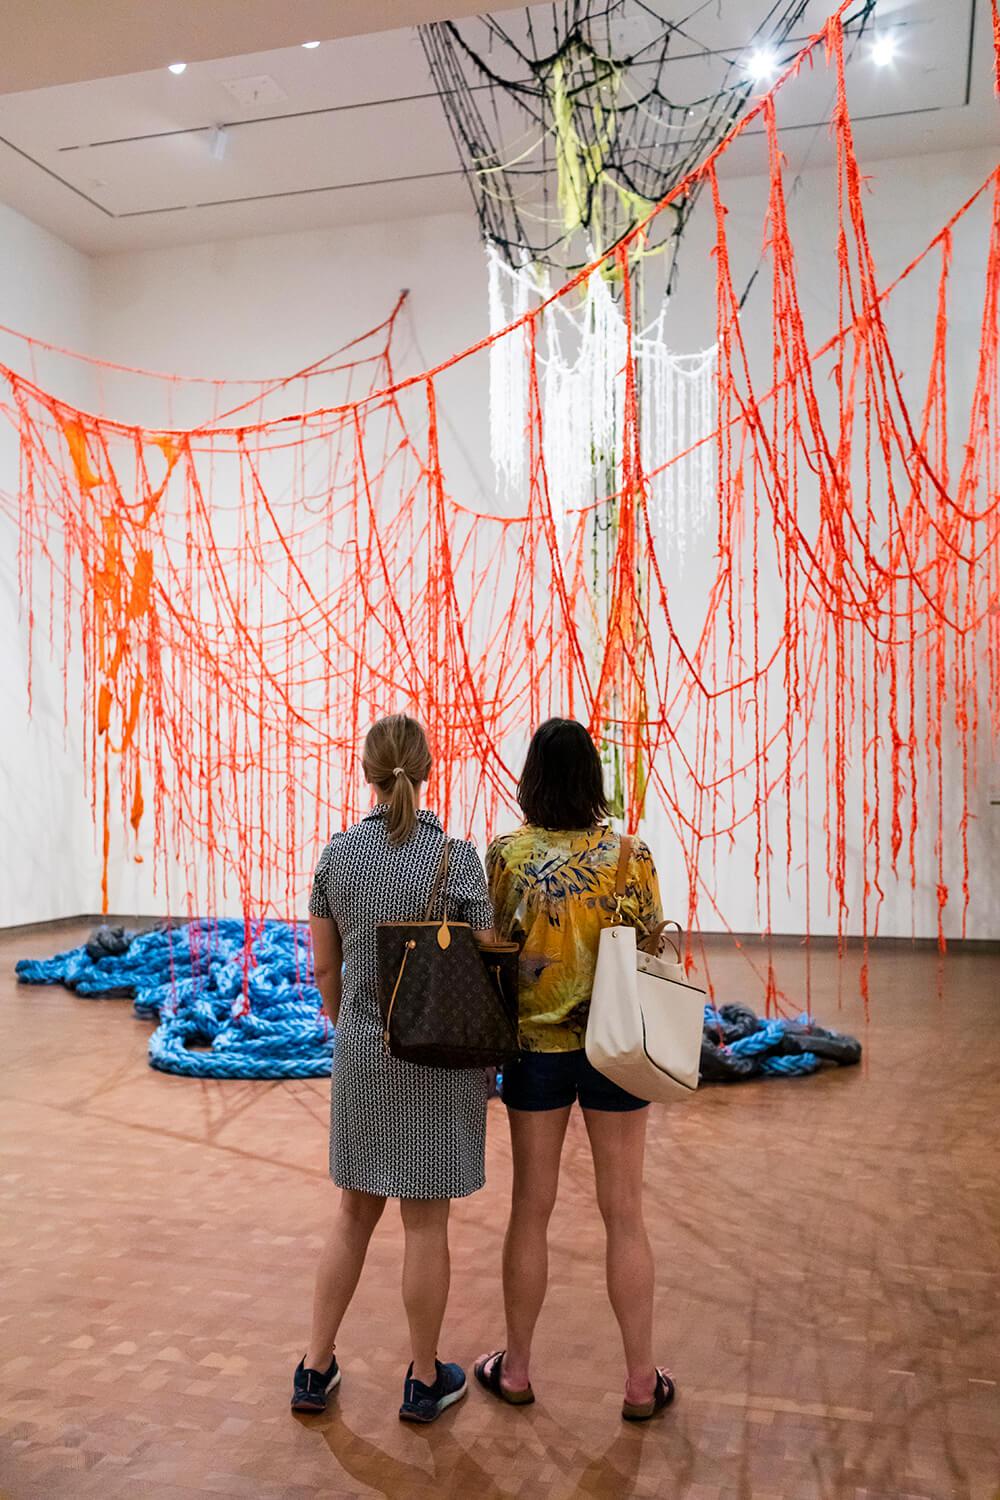 Backside of two people in gallery in frnot of an installation of red rope hanging from above and large blue rope draped on the floor